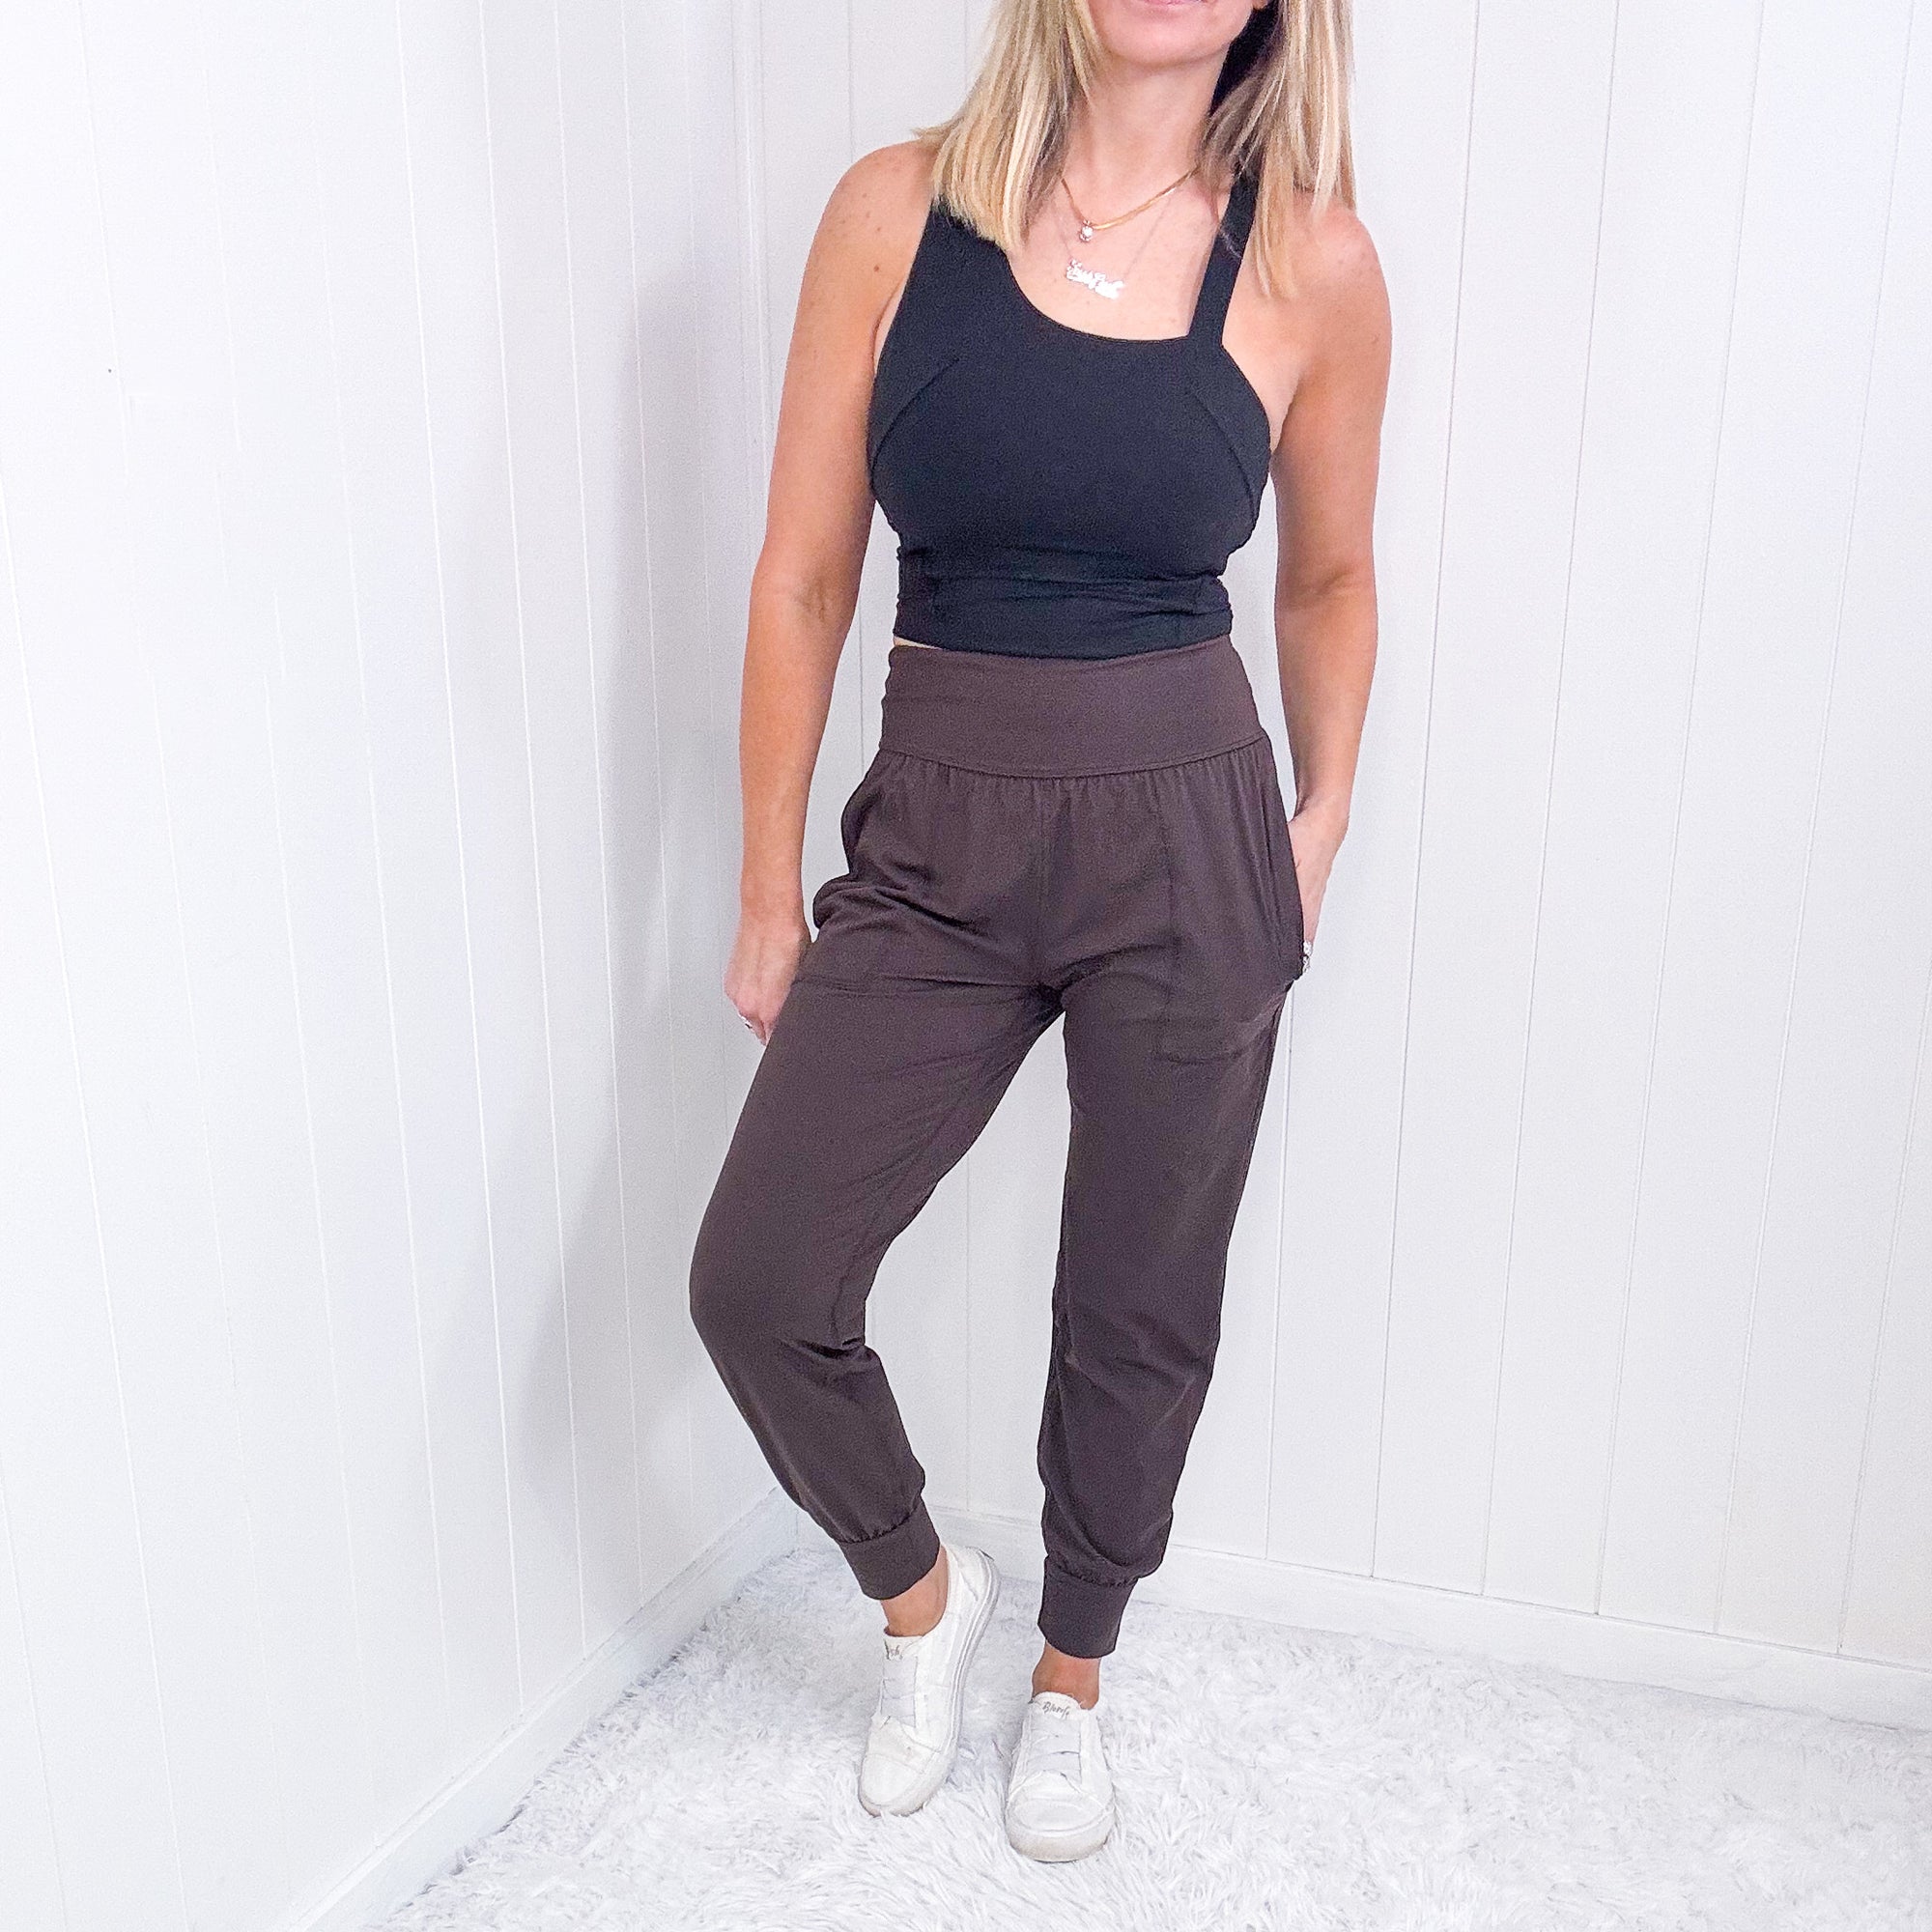 Rae Mode Wide Waistband Cuffed Soft Joggers in Brown - Boujee Boutique 